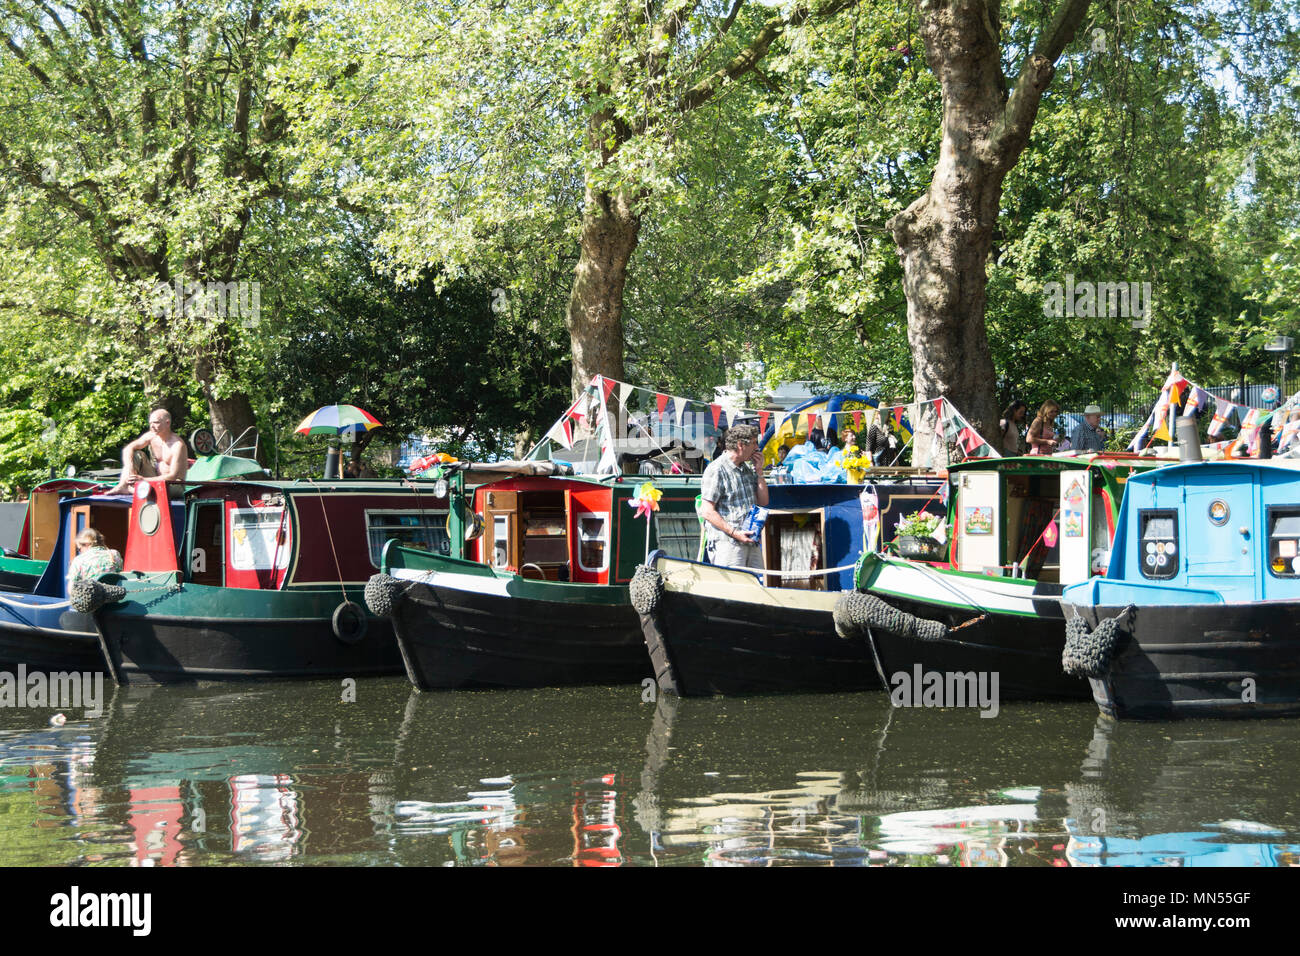 Rows of canal boats in the Canalway Cavalcade waterways festival in London's Little Venice. Stock Photo